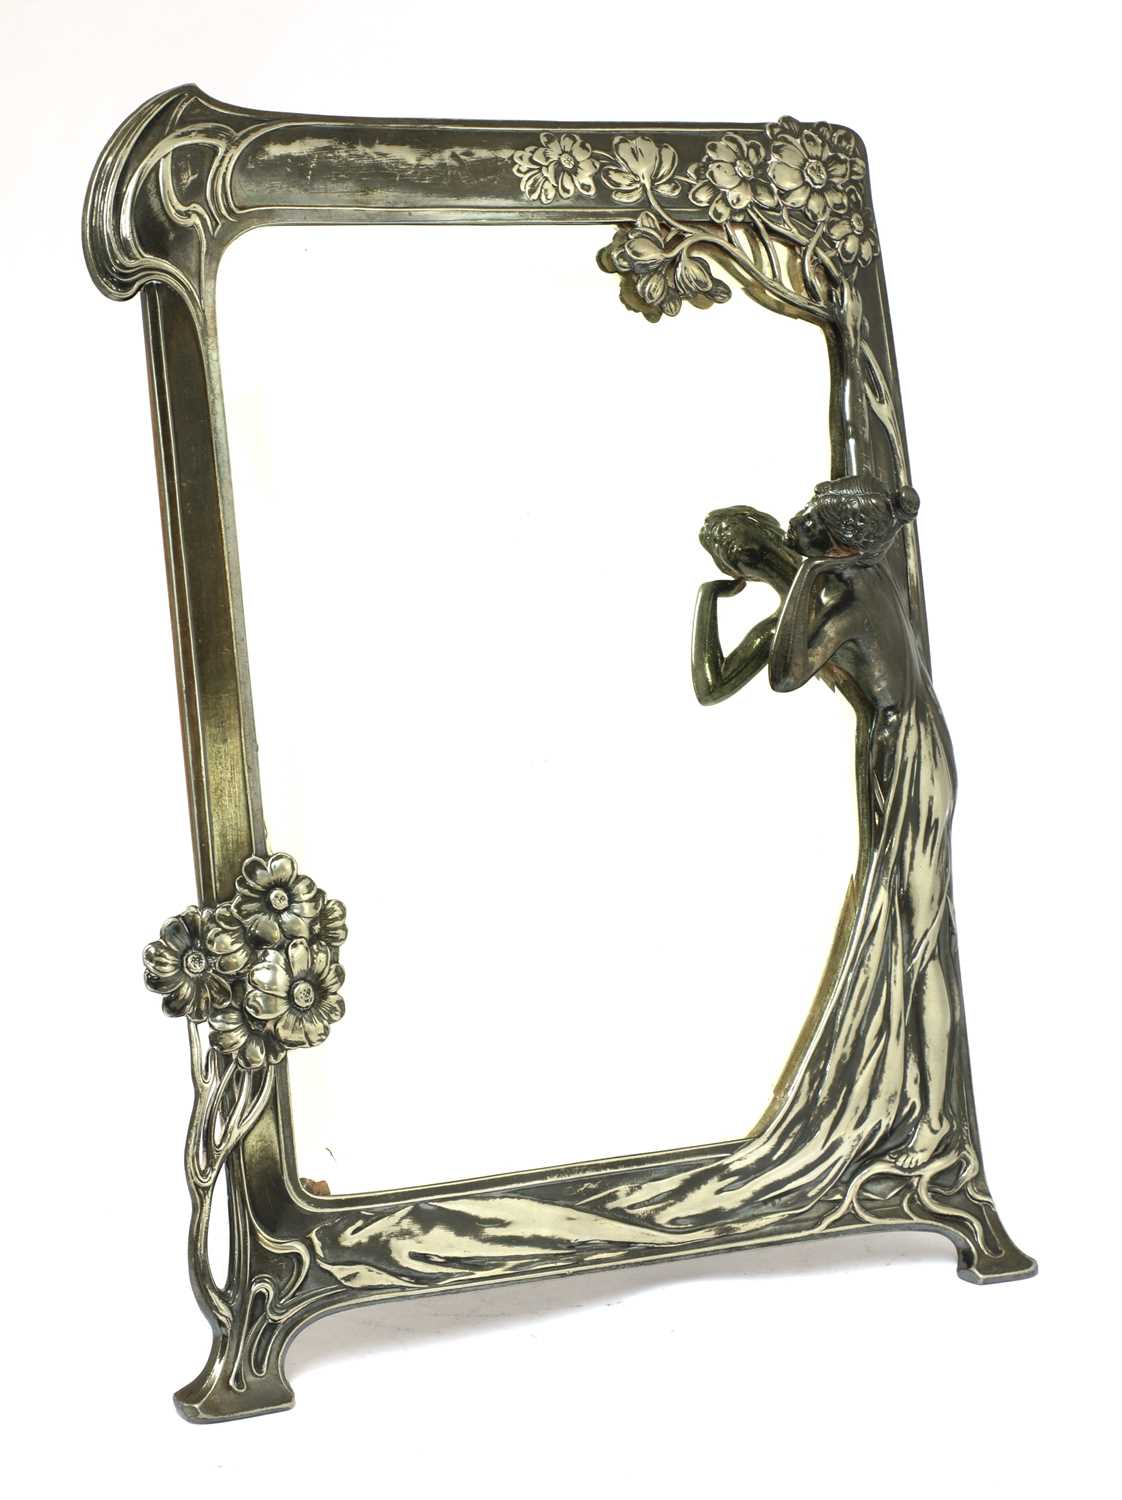 Lot 57 - A WMF silver-plated easel mirror